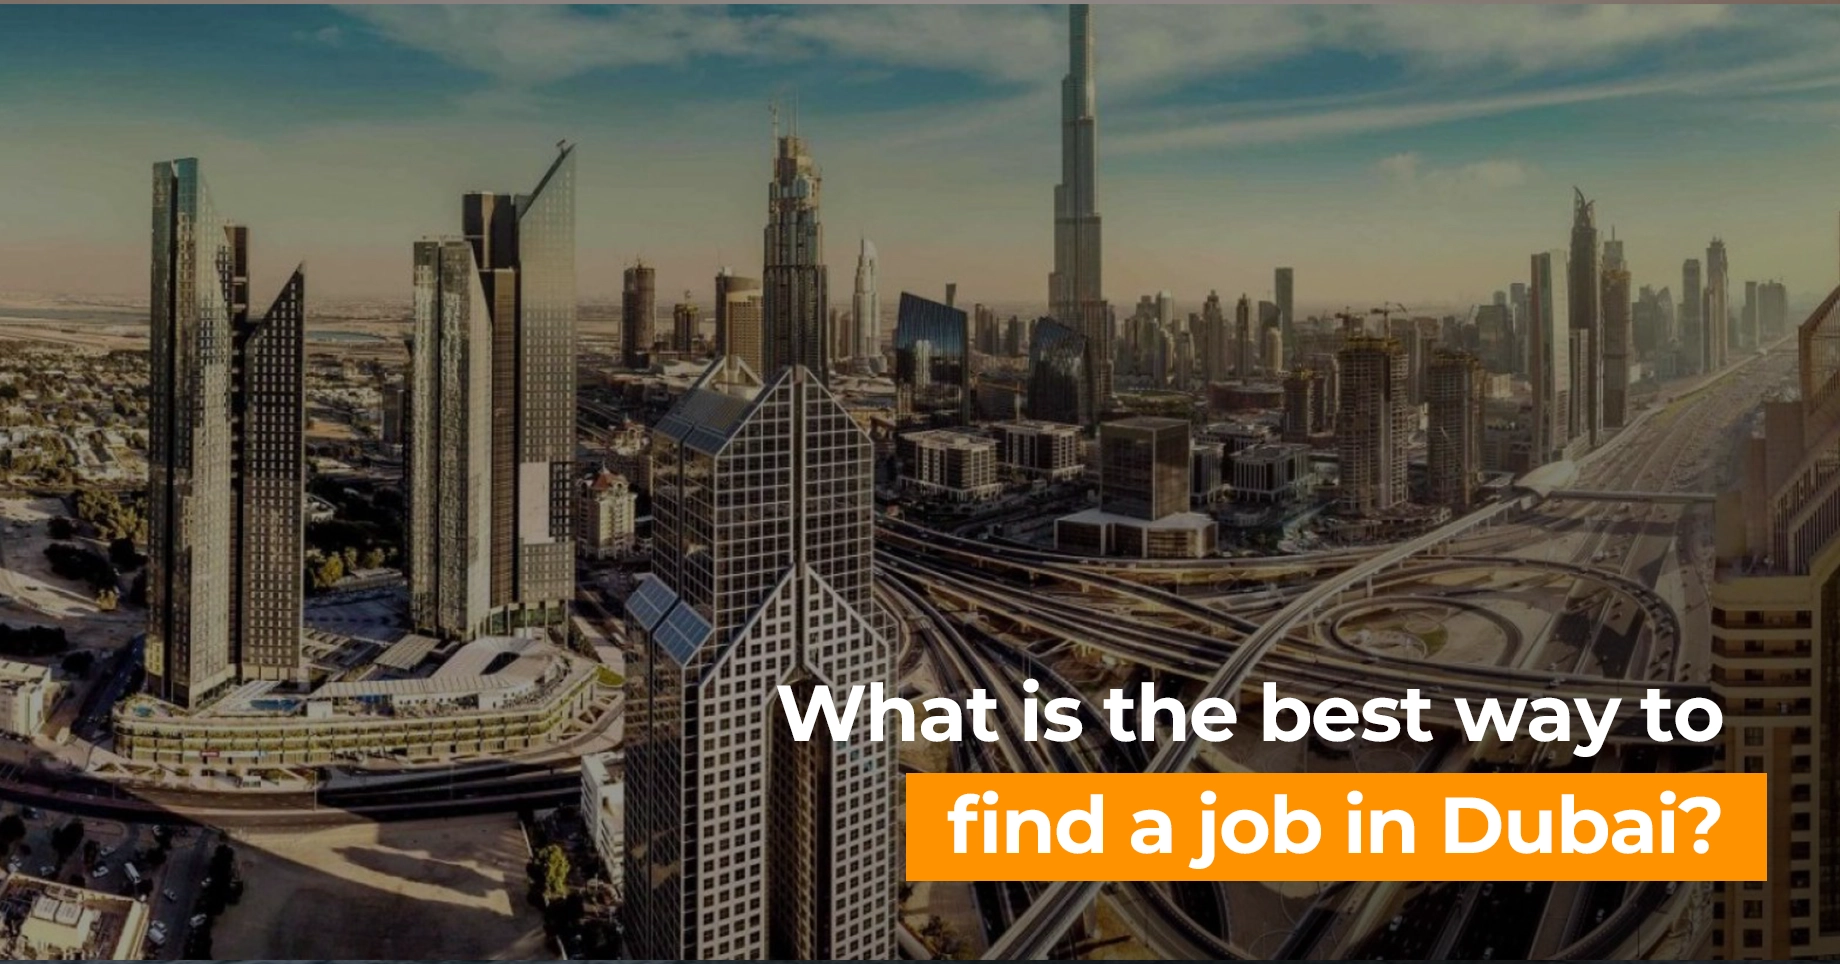 What is the best way to find a job in Dubai?